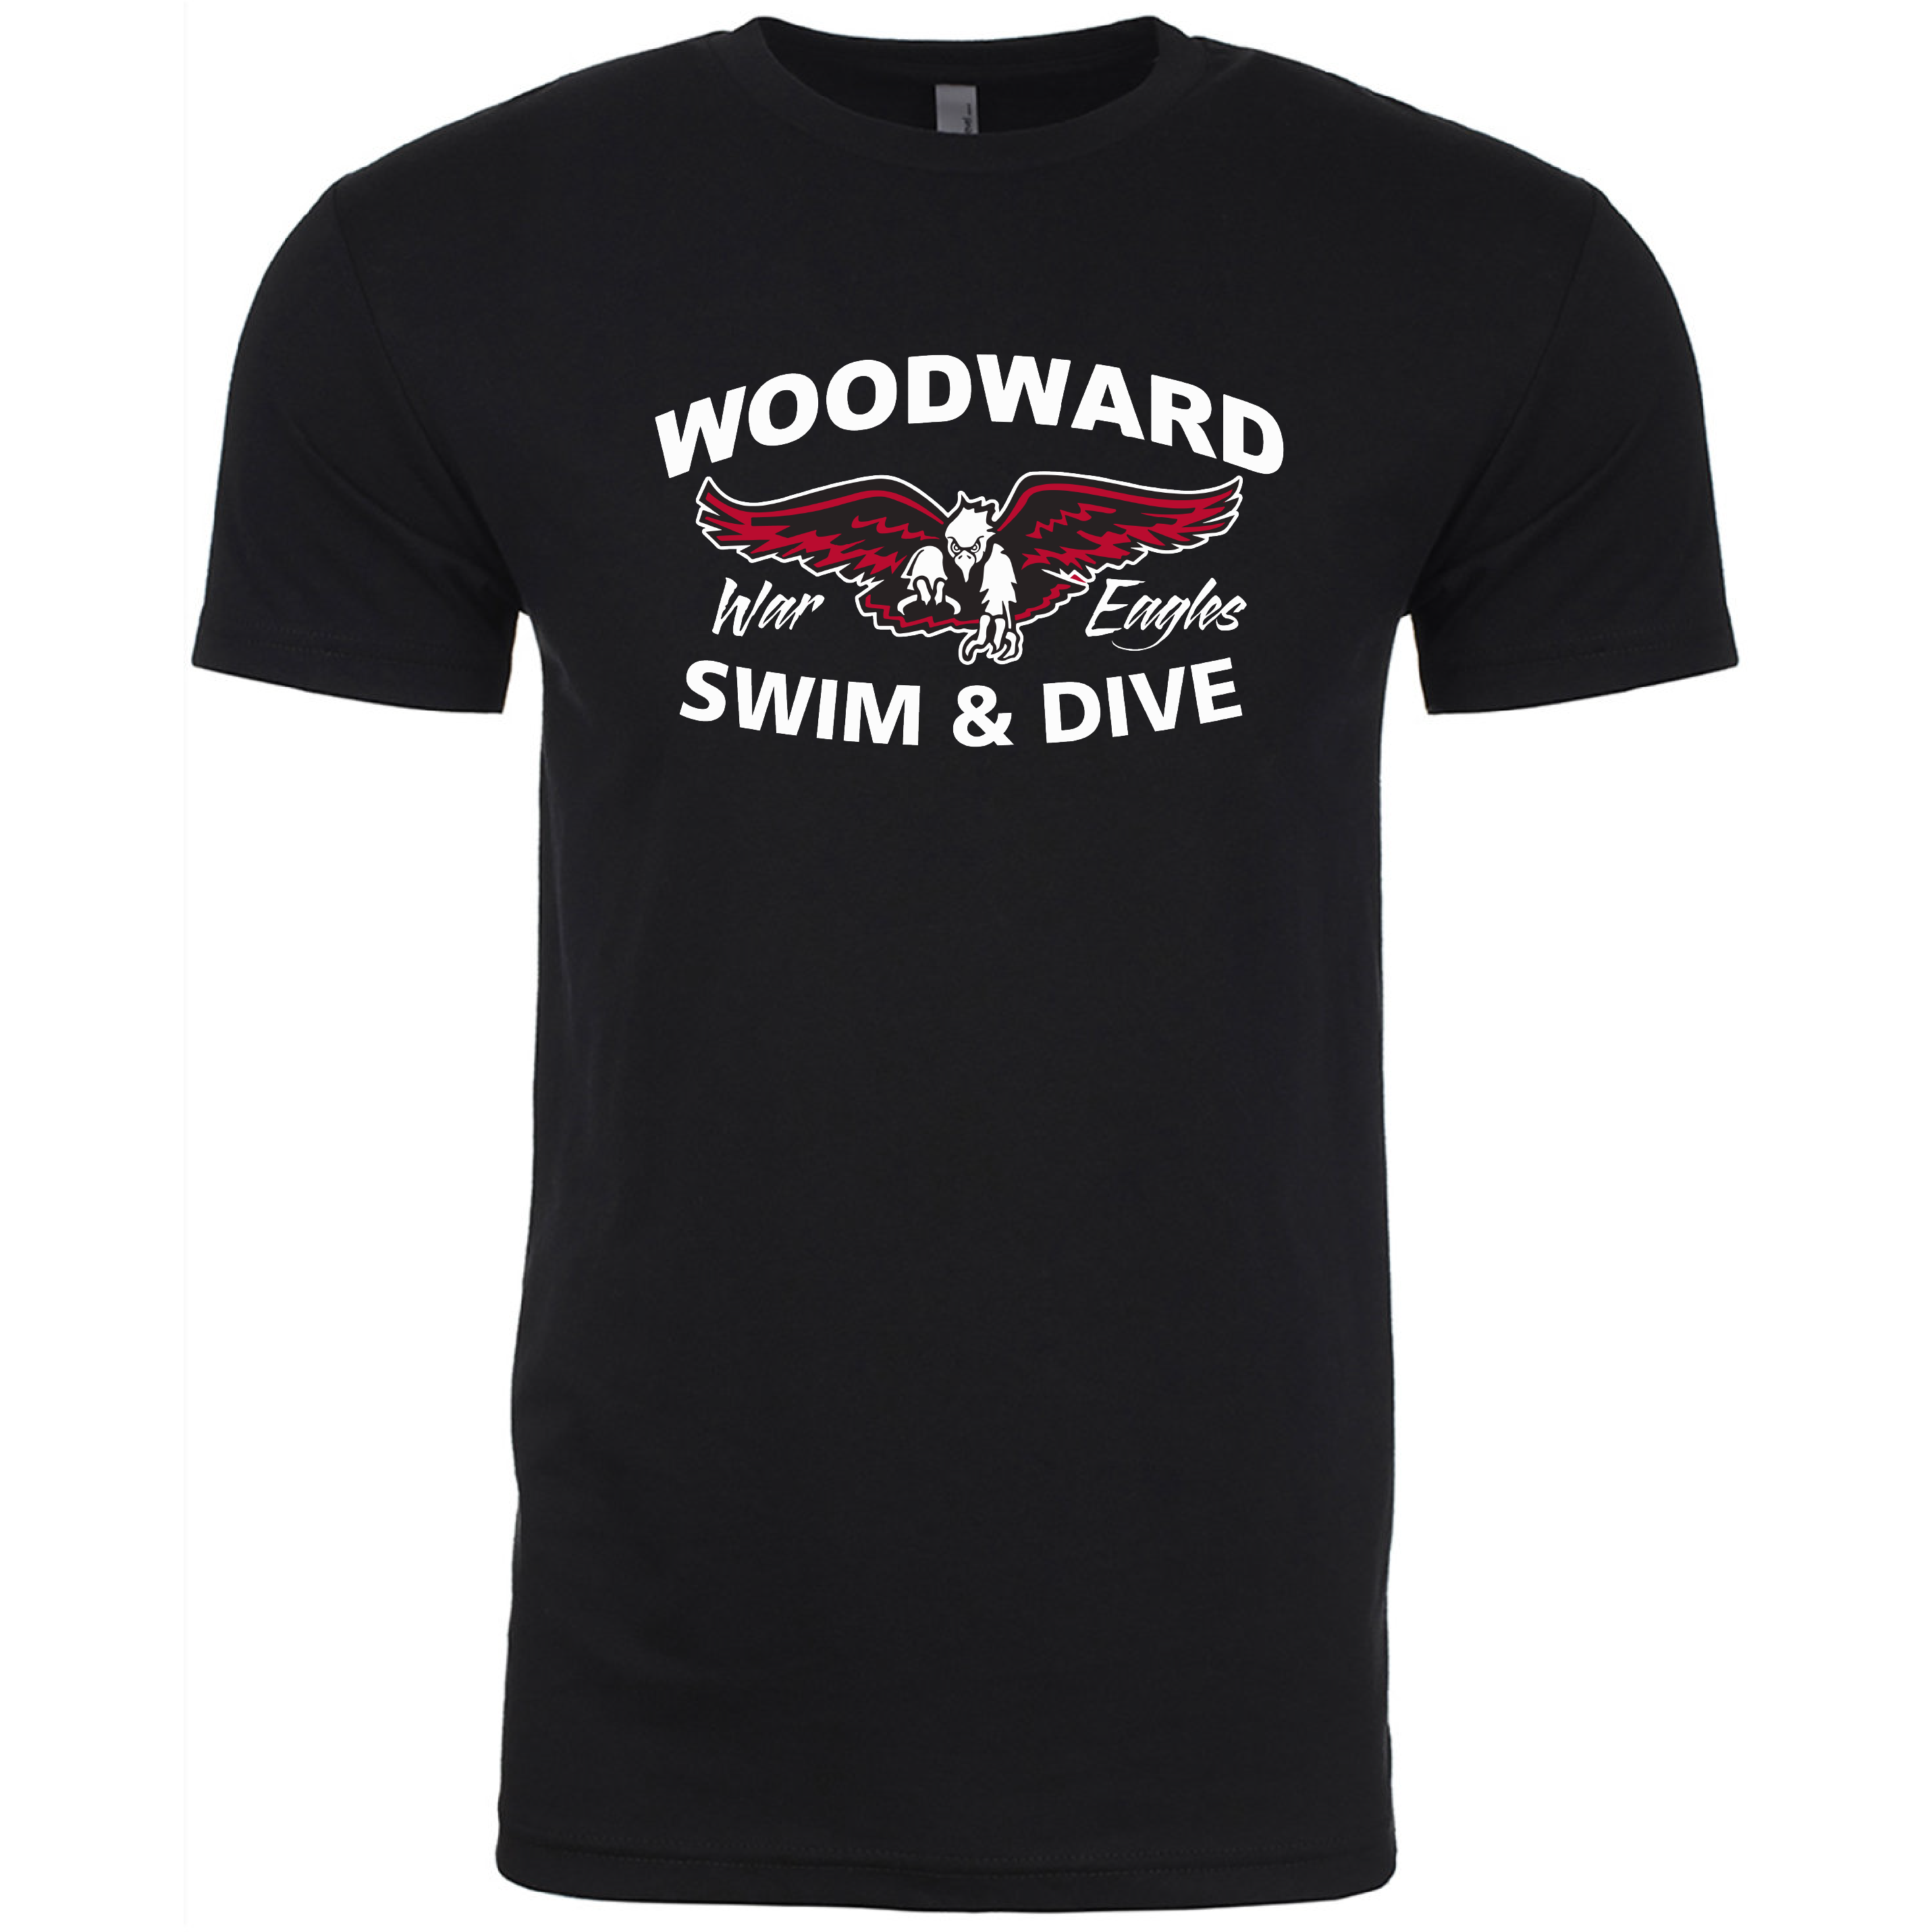 Woodward Swim and Dive T-Shirt